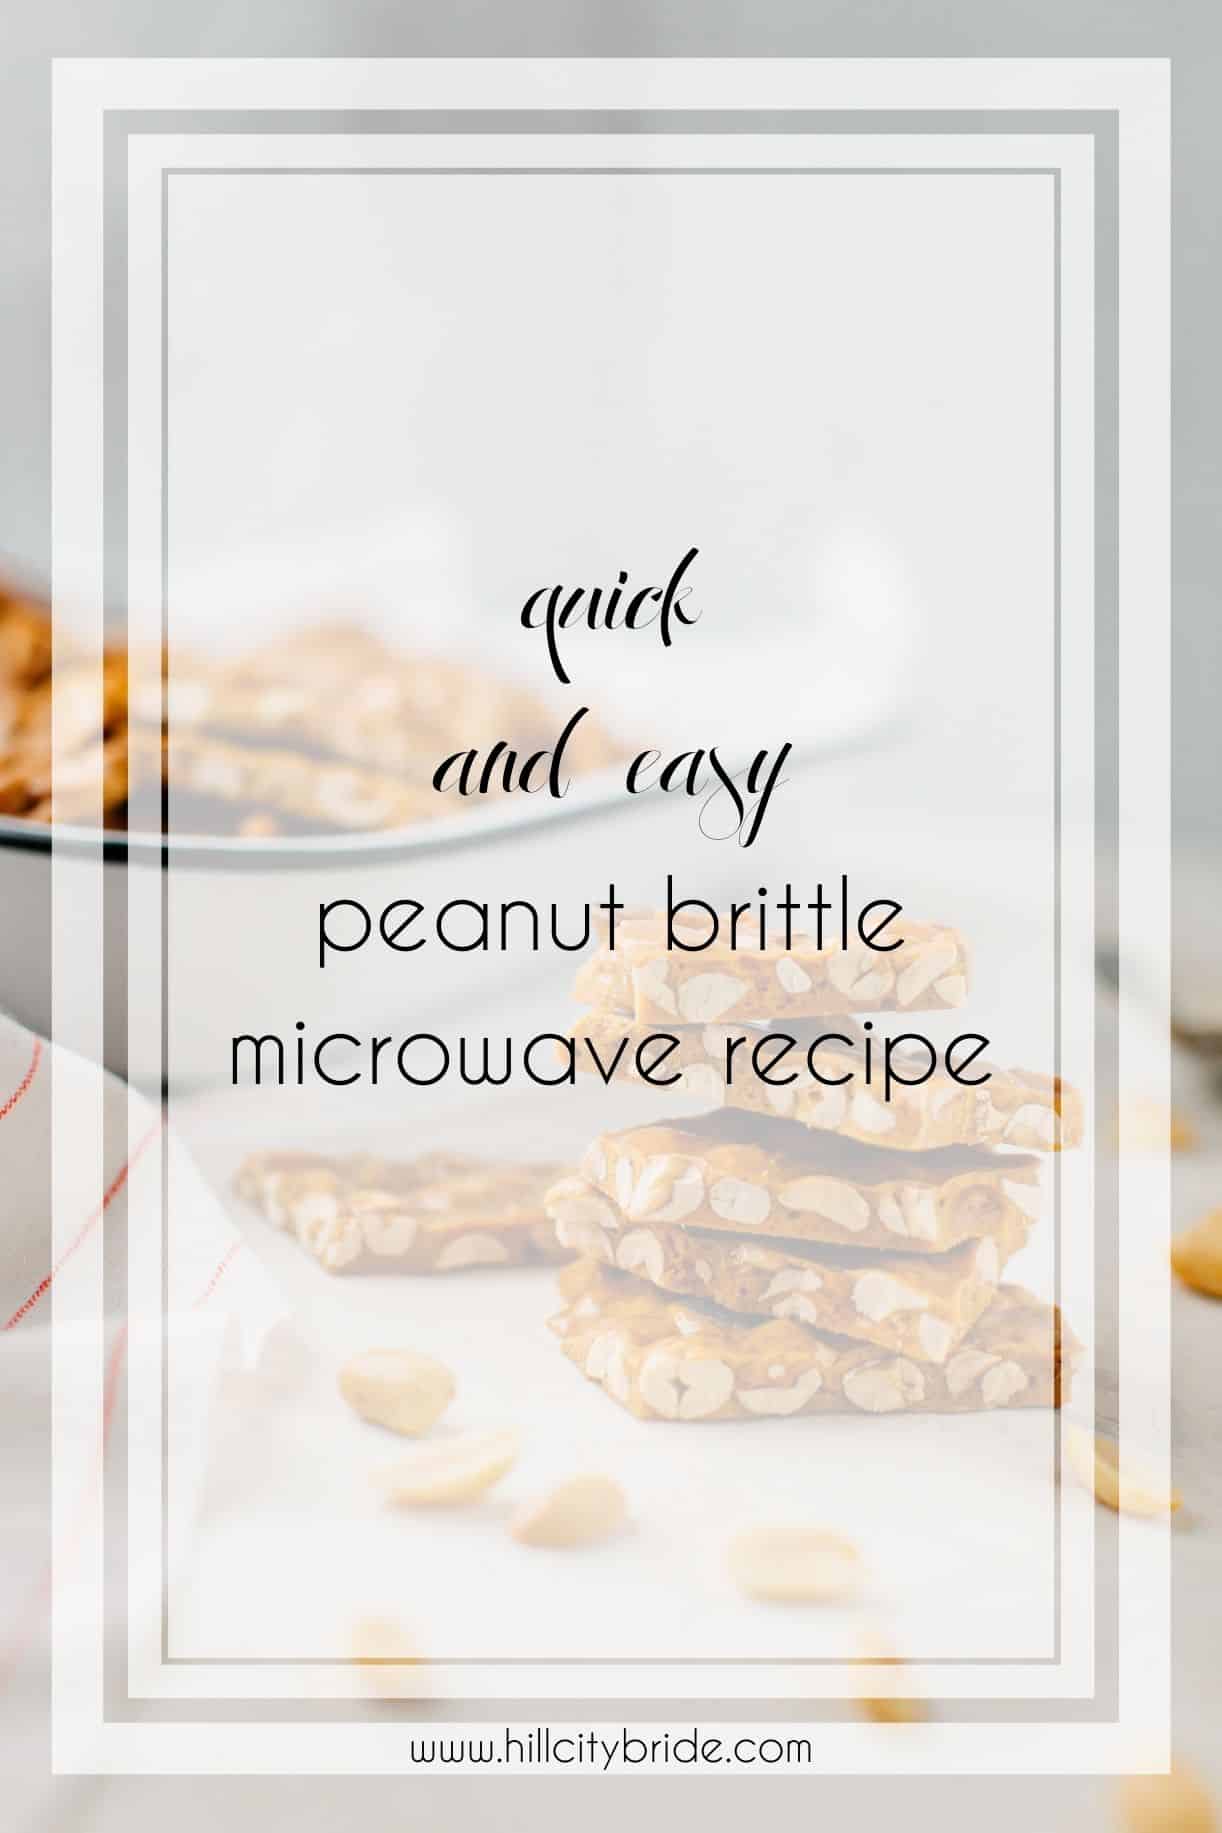 The Most Amazing Peanut Brittle Microwave Recipe Ever